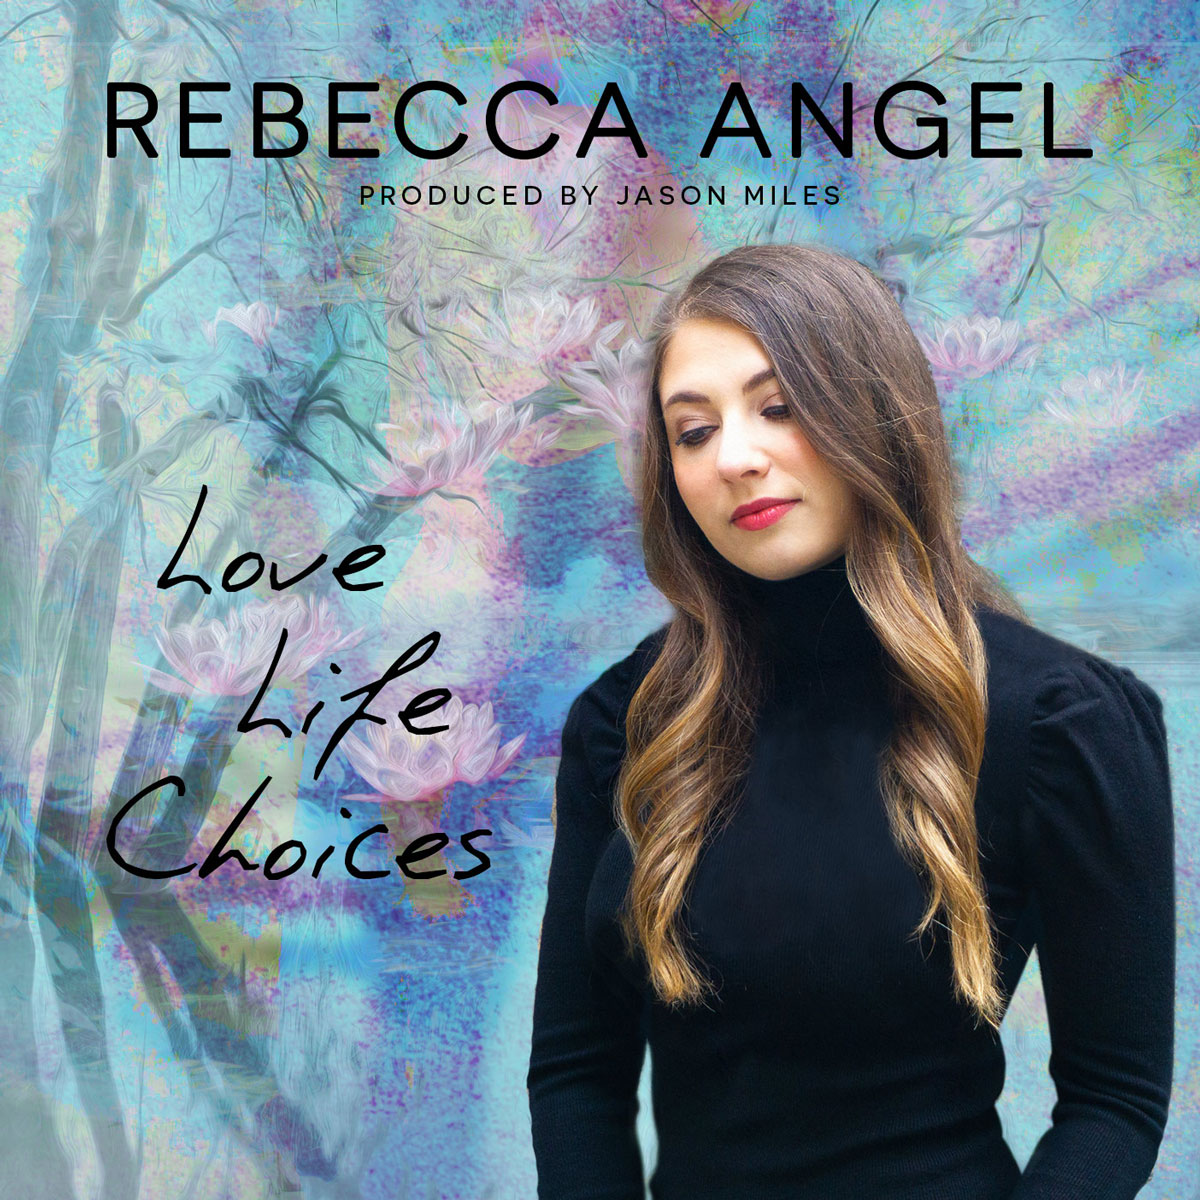 Rebecca Angel - Love, Life, Choices Out Now!